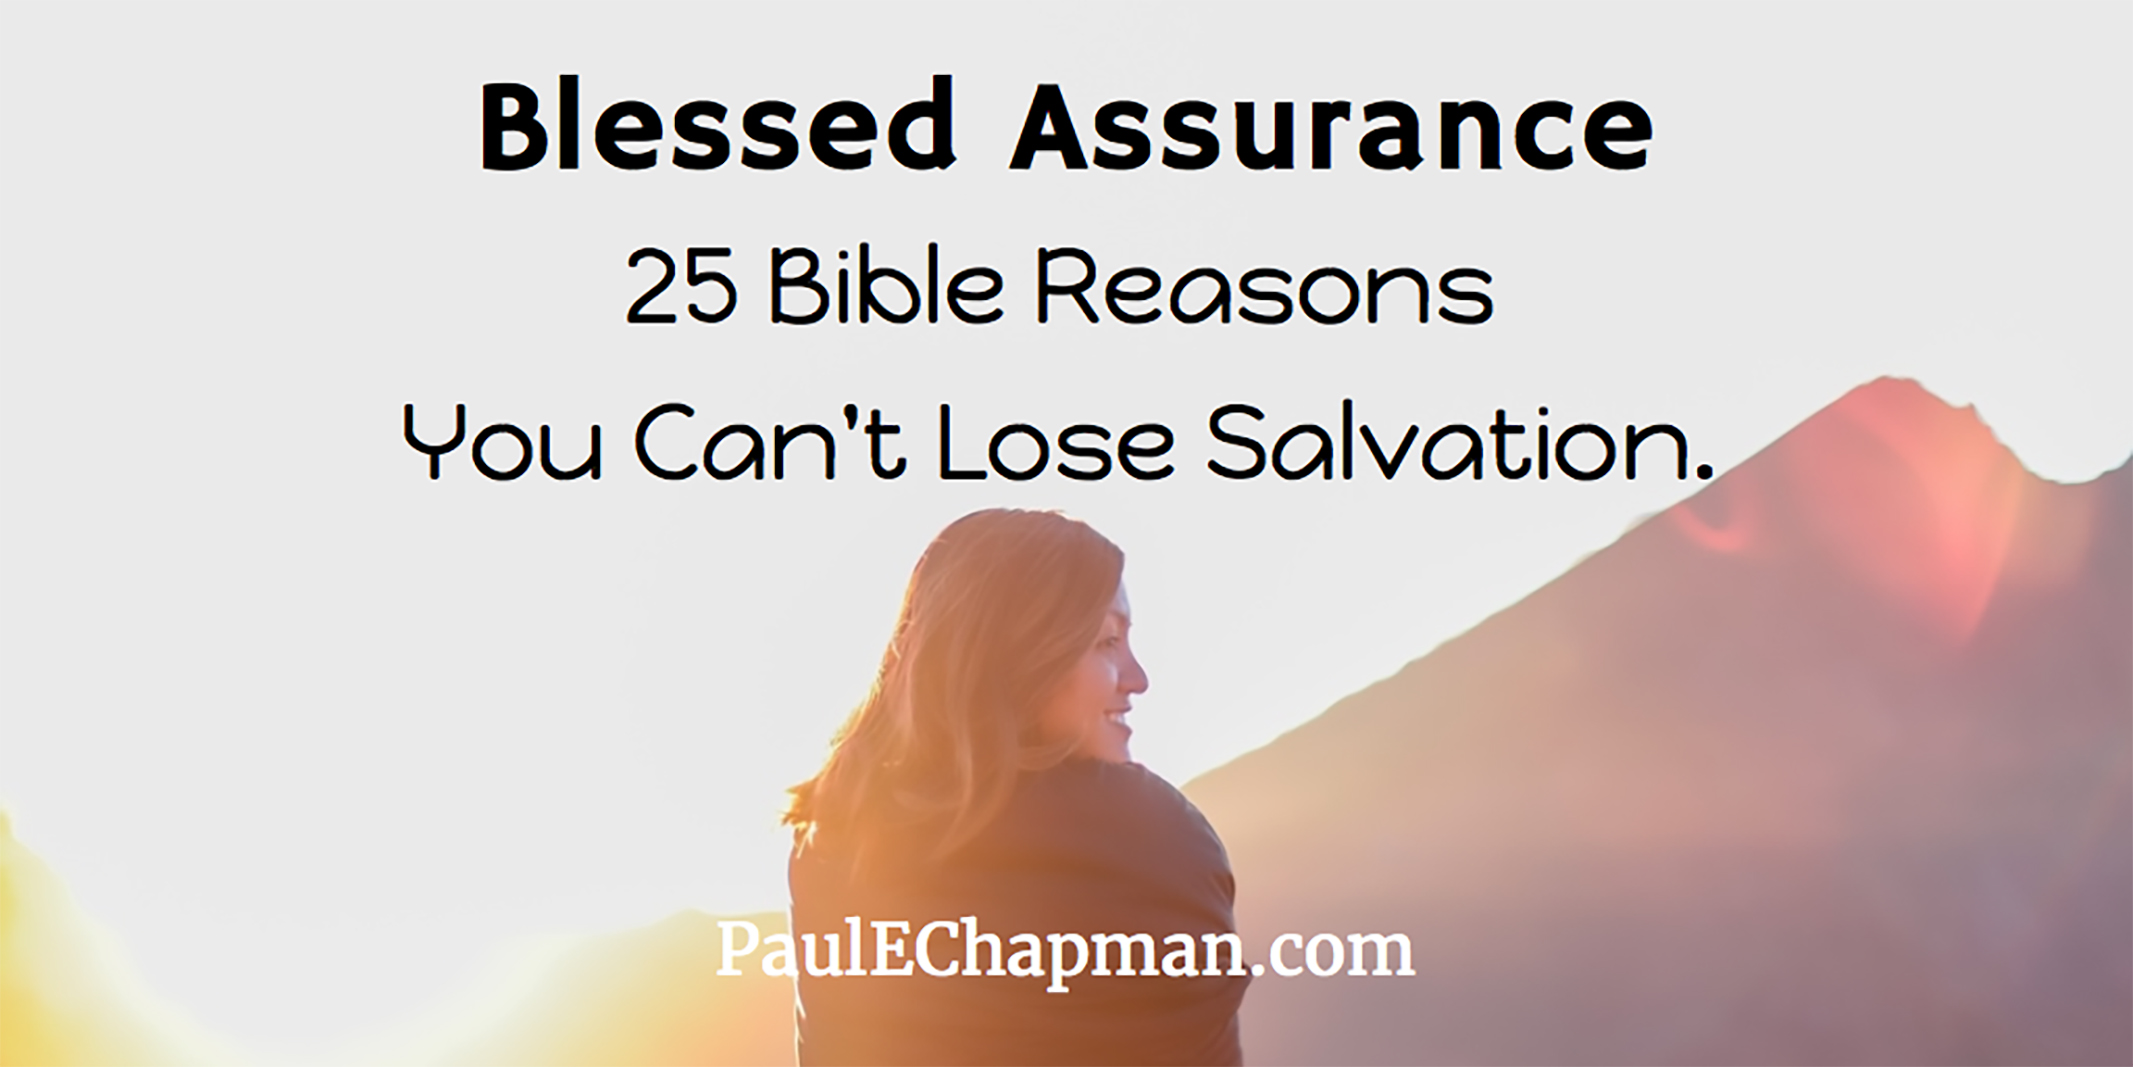 Blessed Assurance – 25 Biblical Reasons You Can’t Lose Salvation